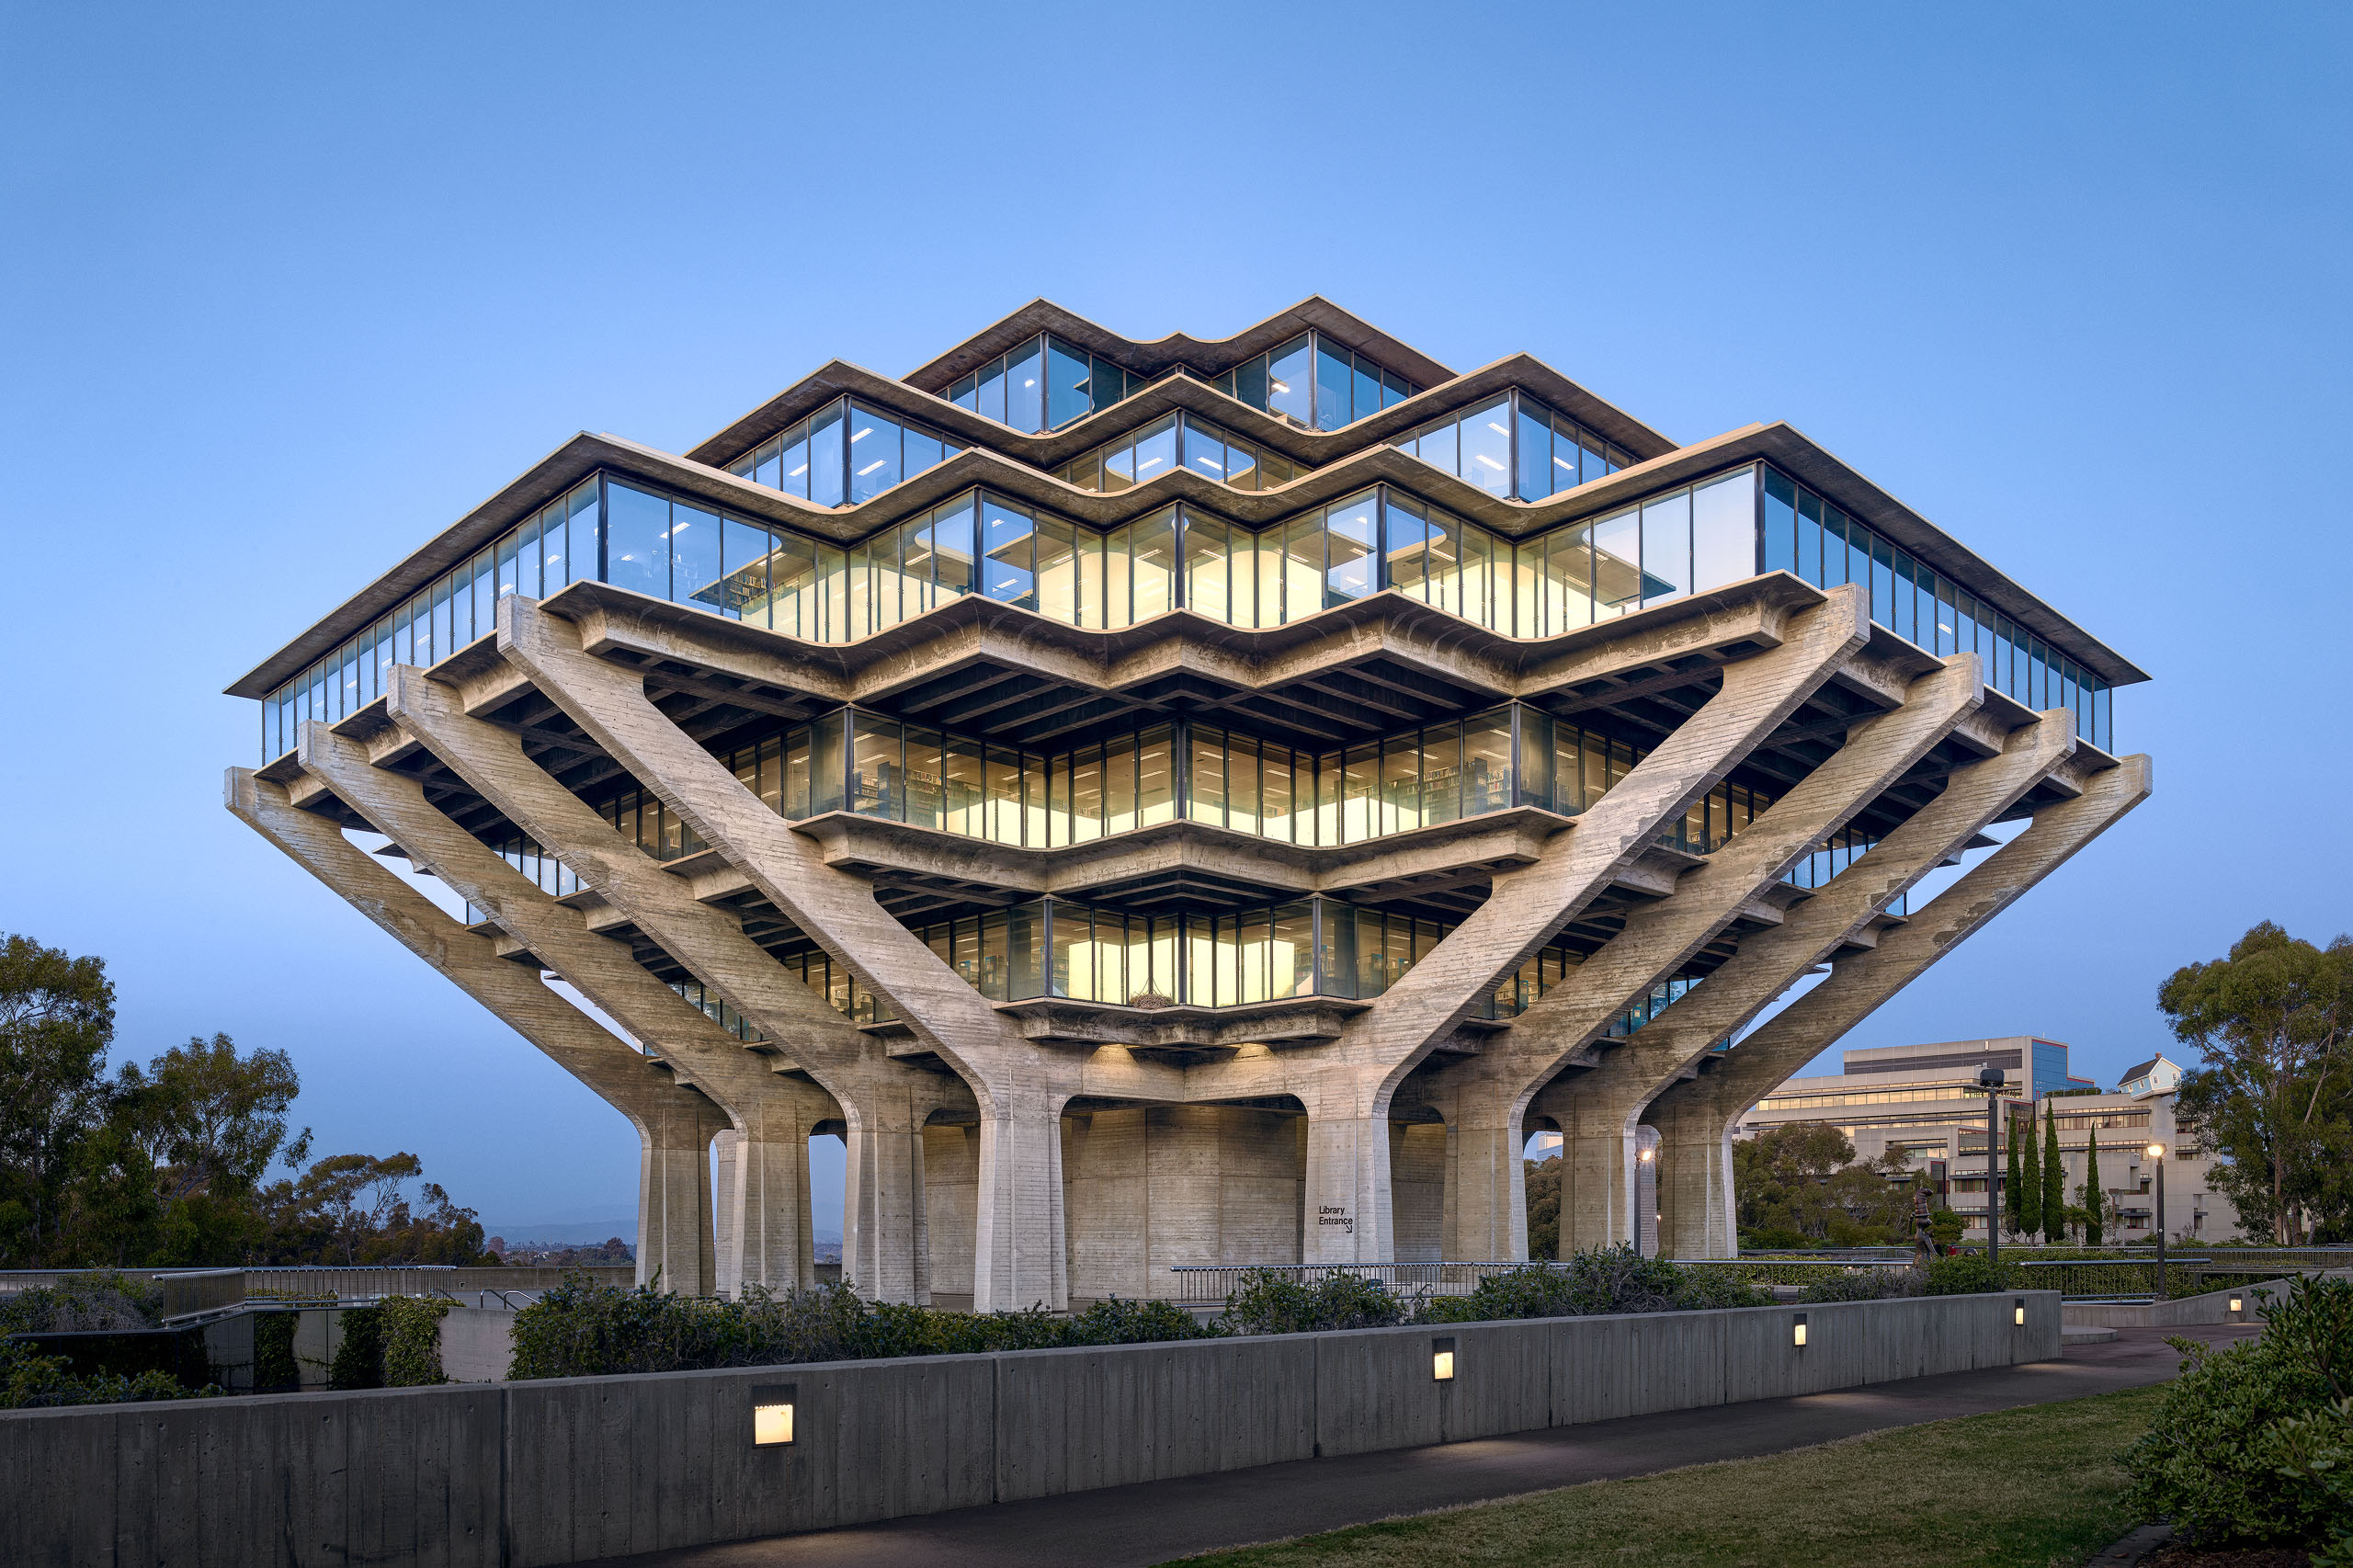 Architectural photography by Warren Diggles. Geisel Library, University of California San Diego.